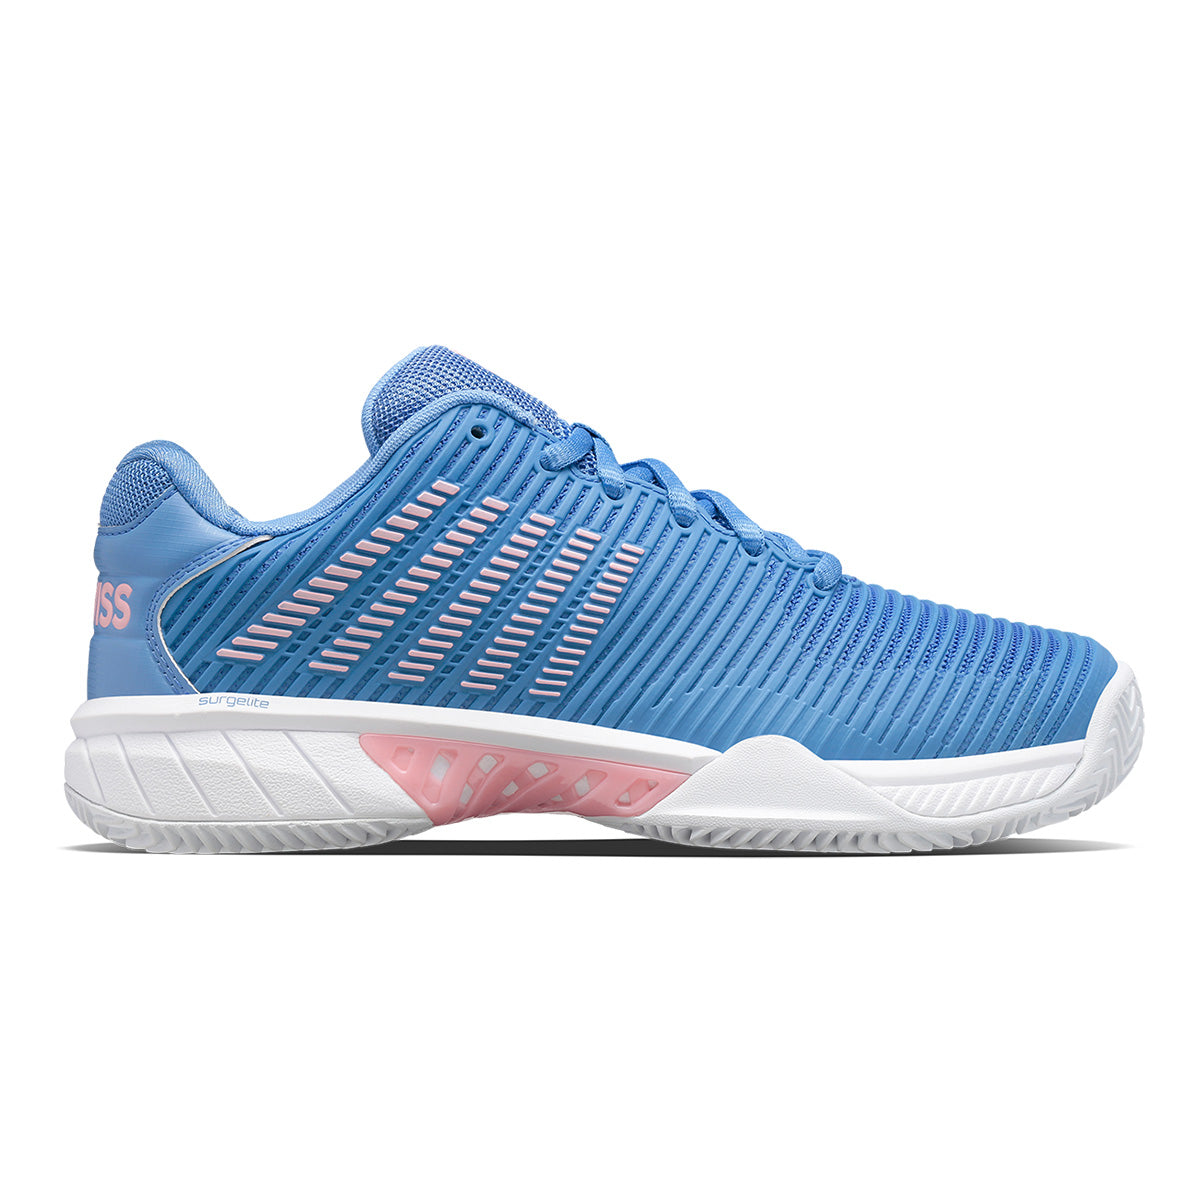 Quealent Women's Athletic Tennis Running Shoes - Malaysia